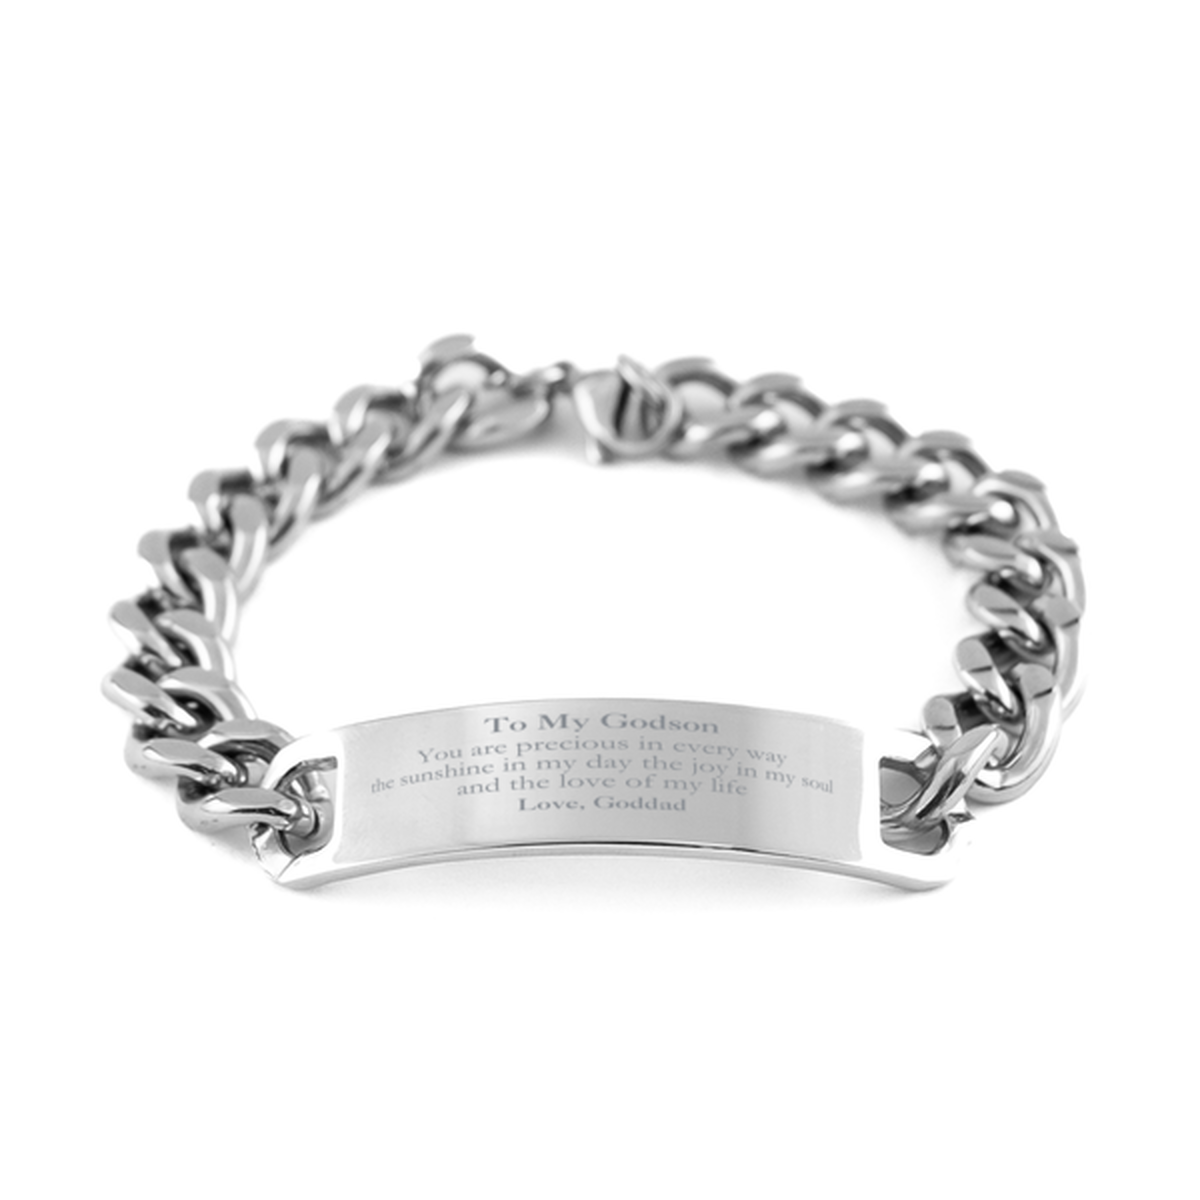 Graduation Gifts for Godson Cuban Chain Stainless Steel Bracelet Present from Goddad, Christmas Godson Birthday Gifts Godson You are precious in every way the sunshine in my day. Love, Goddad